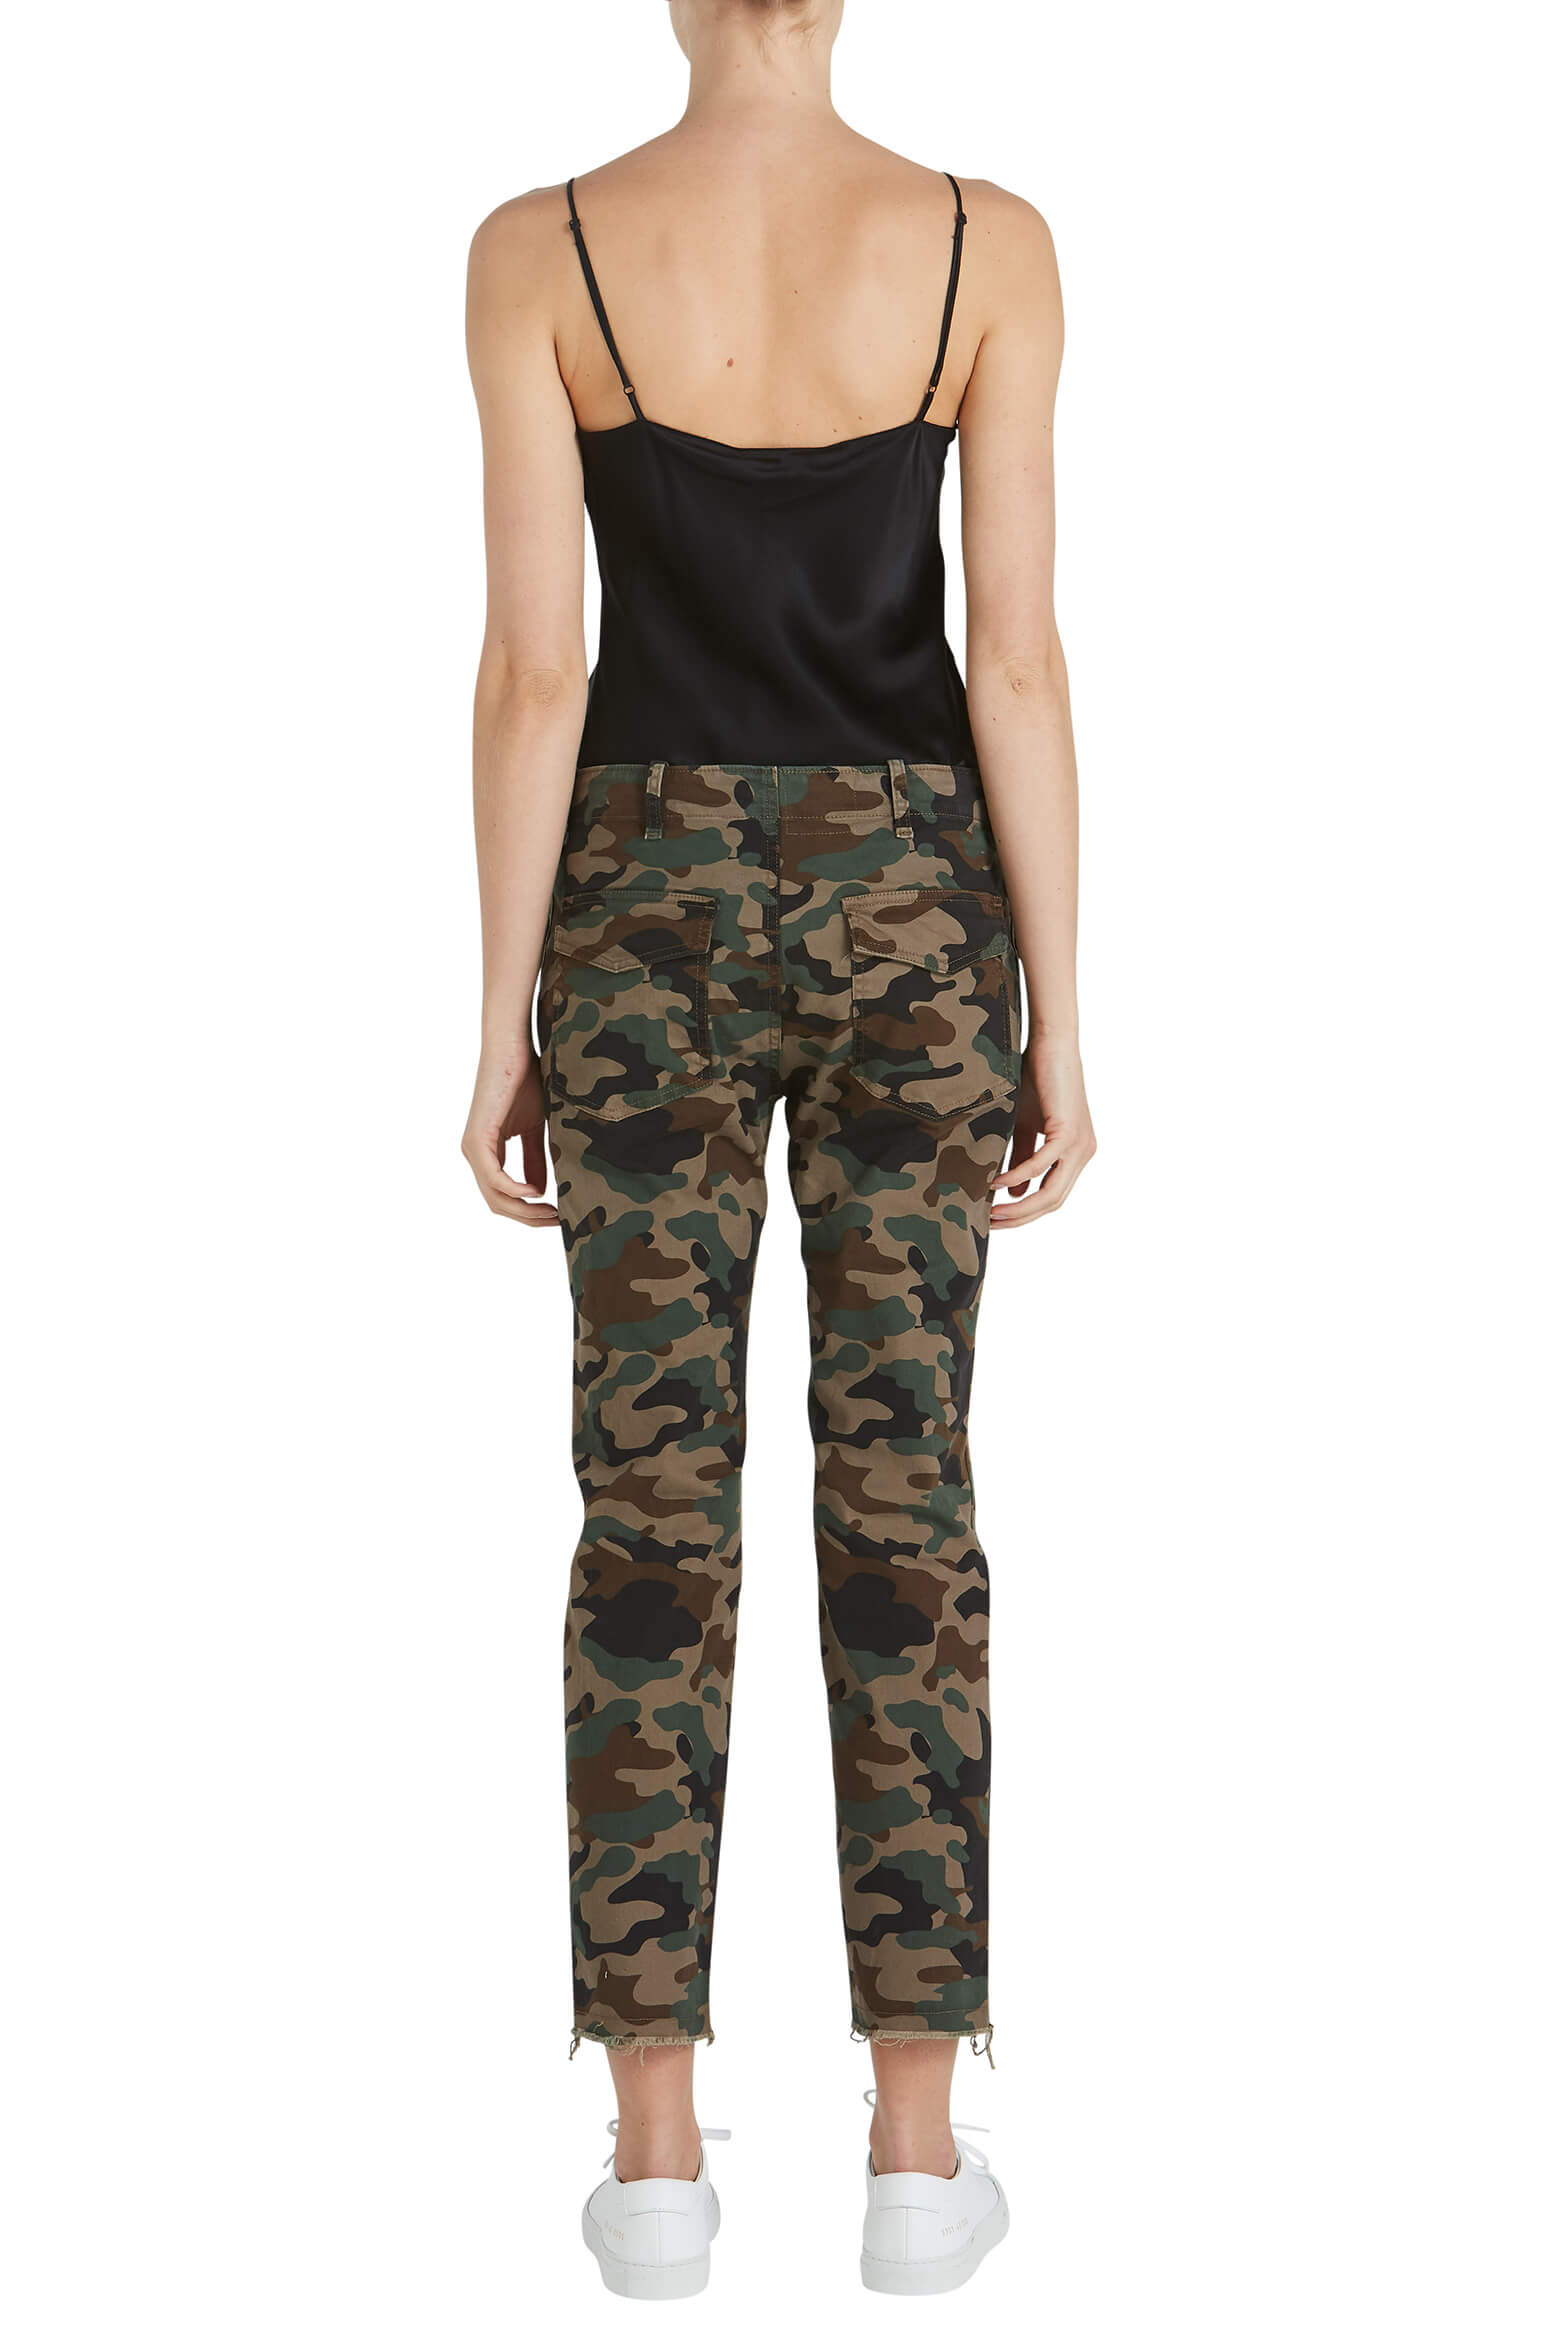 Nili Lotan Jenna Pant in Brown Camouflage from The New Trend